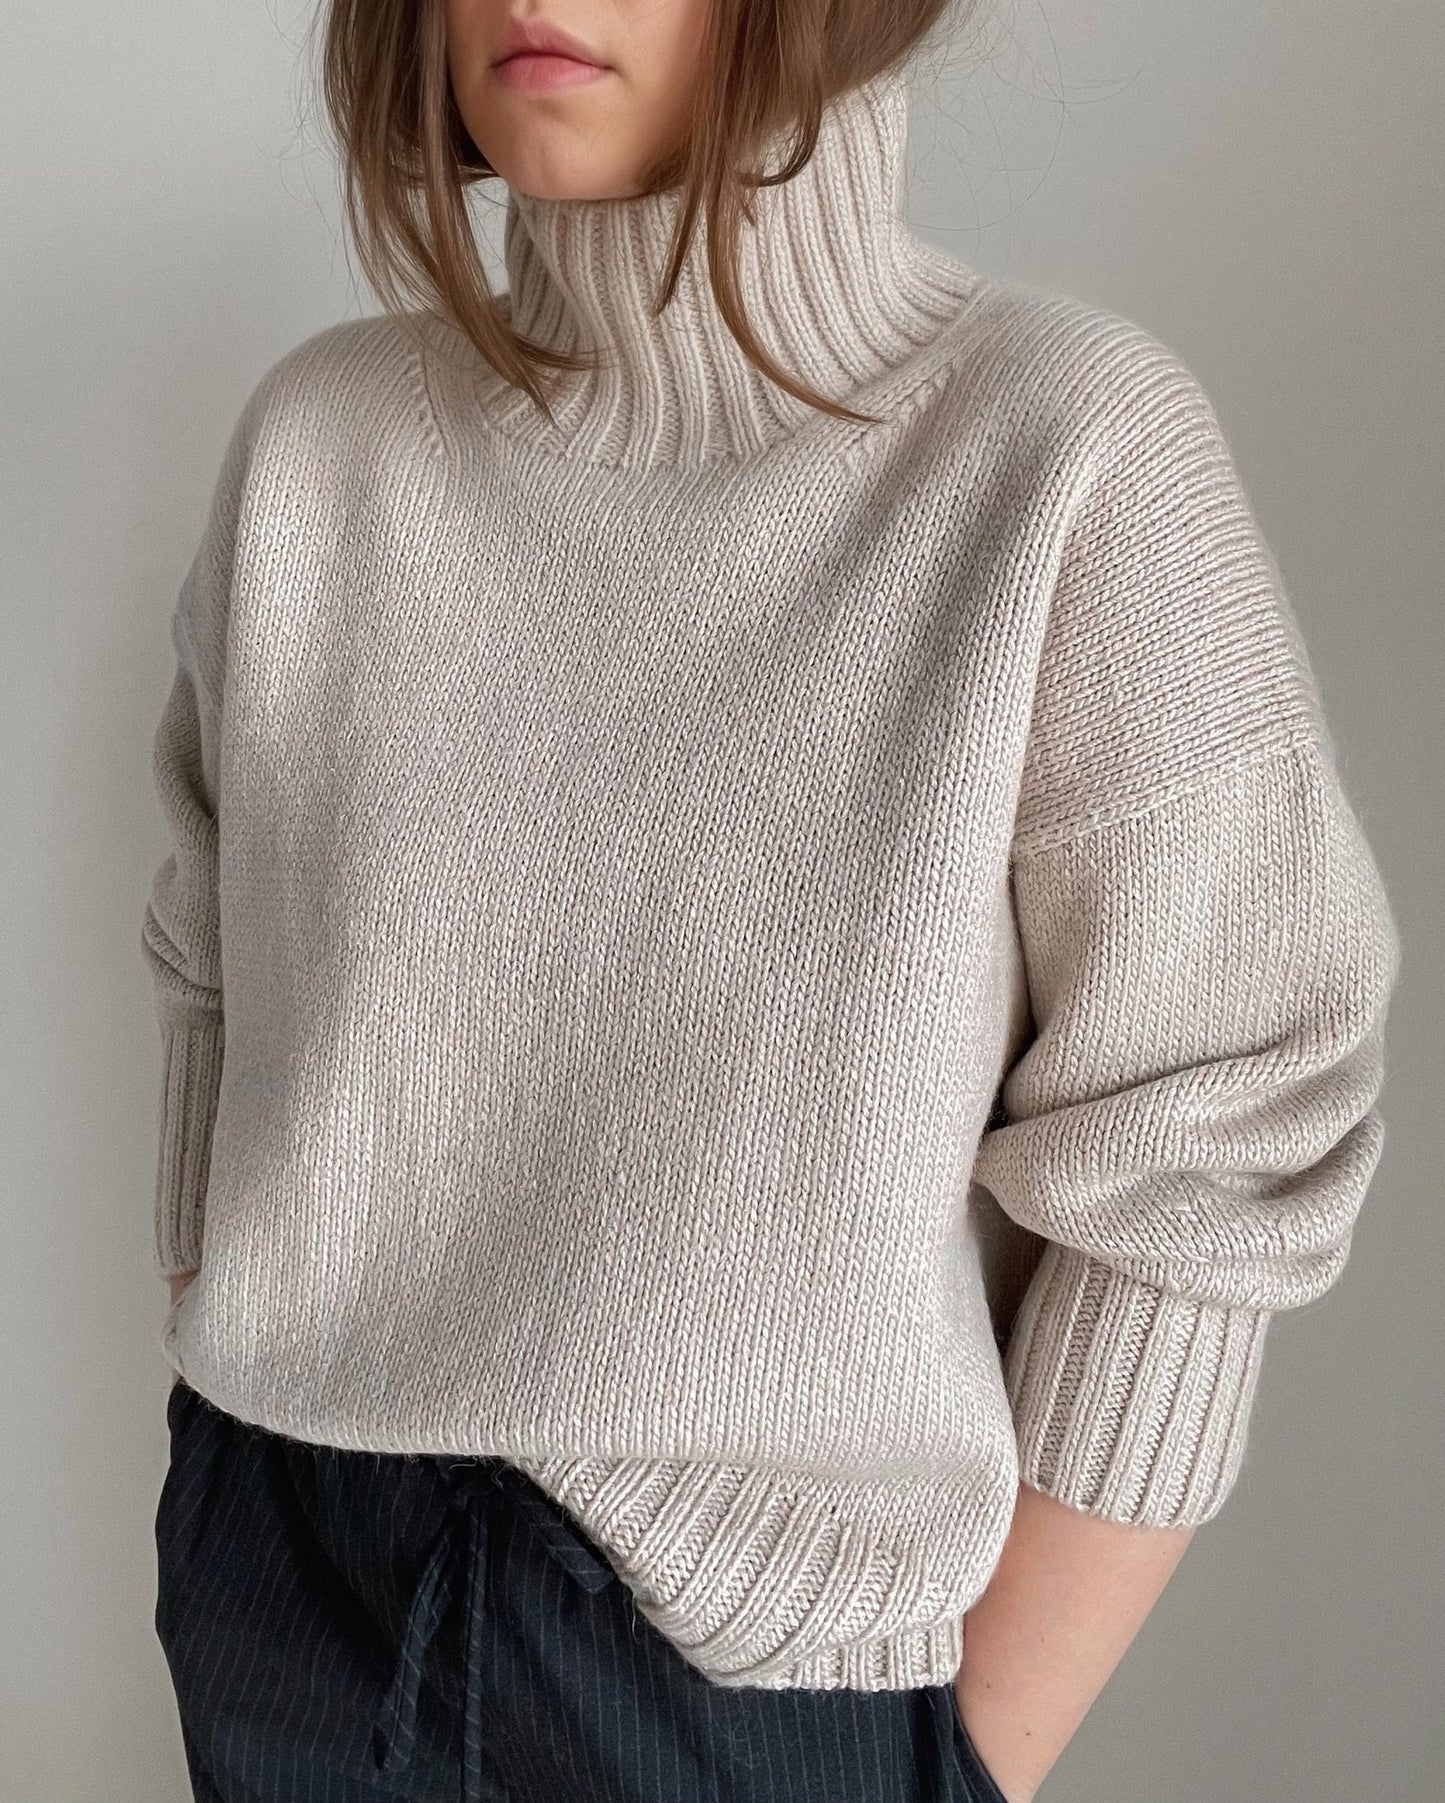 Long-sleeved Cecil Sweater pattern in soft woolen texture